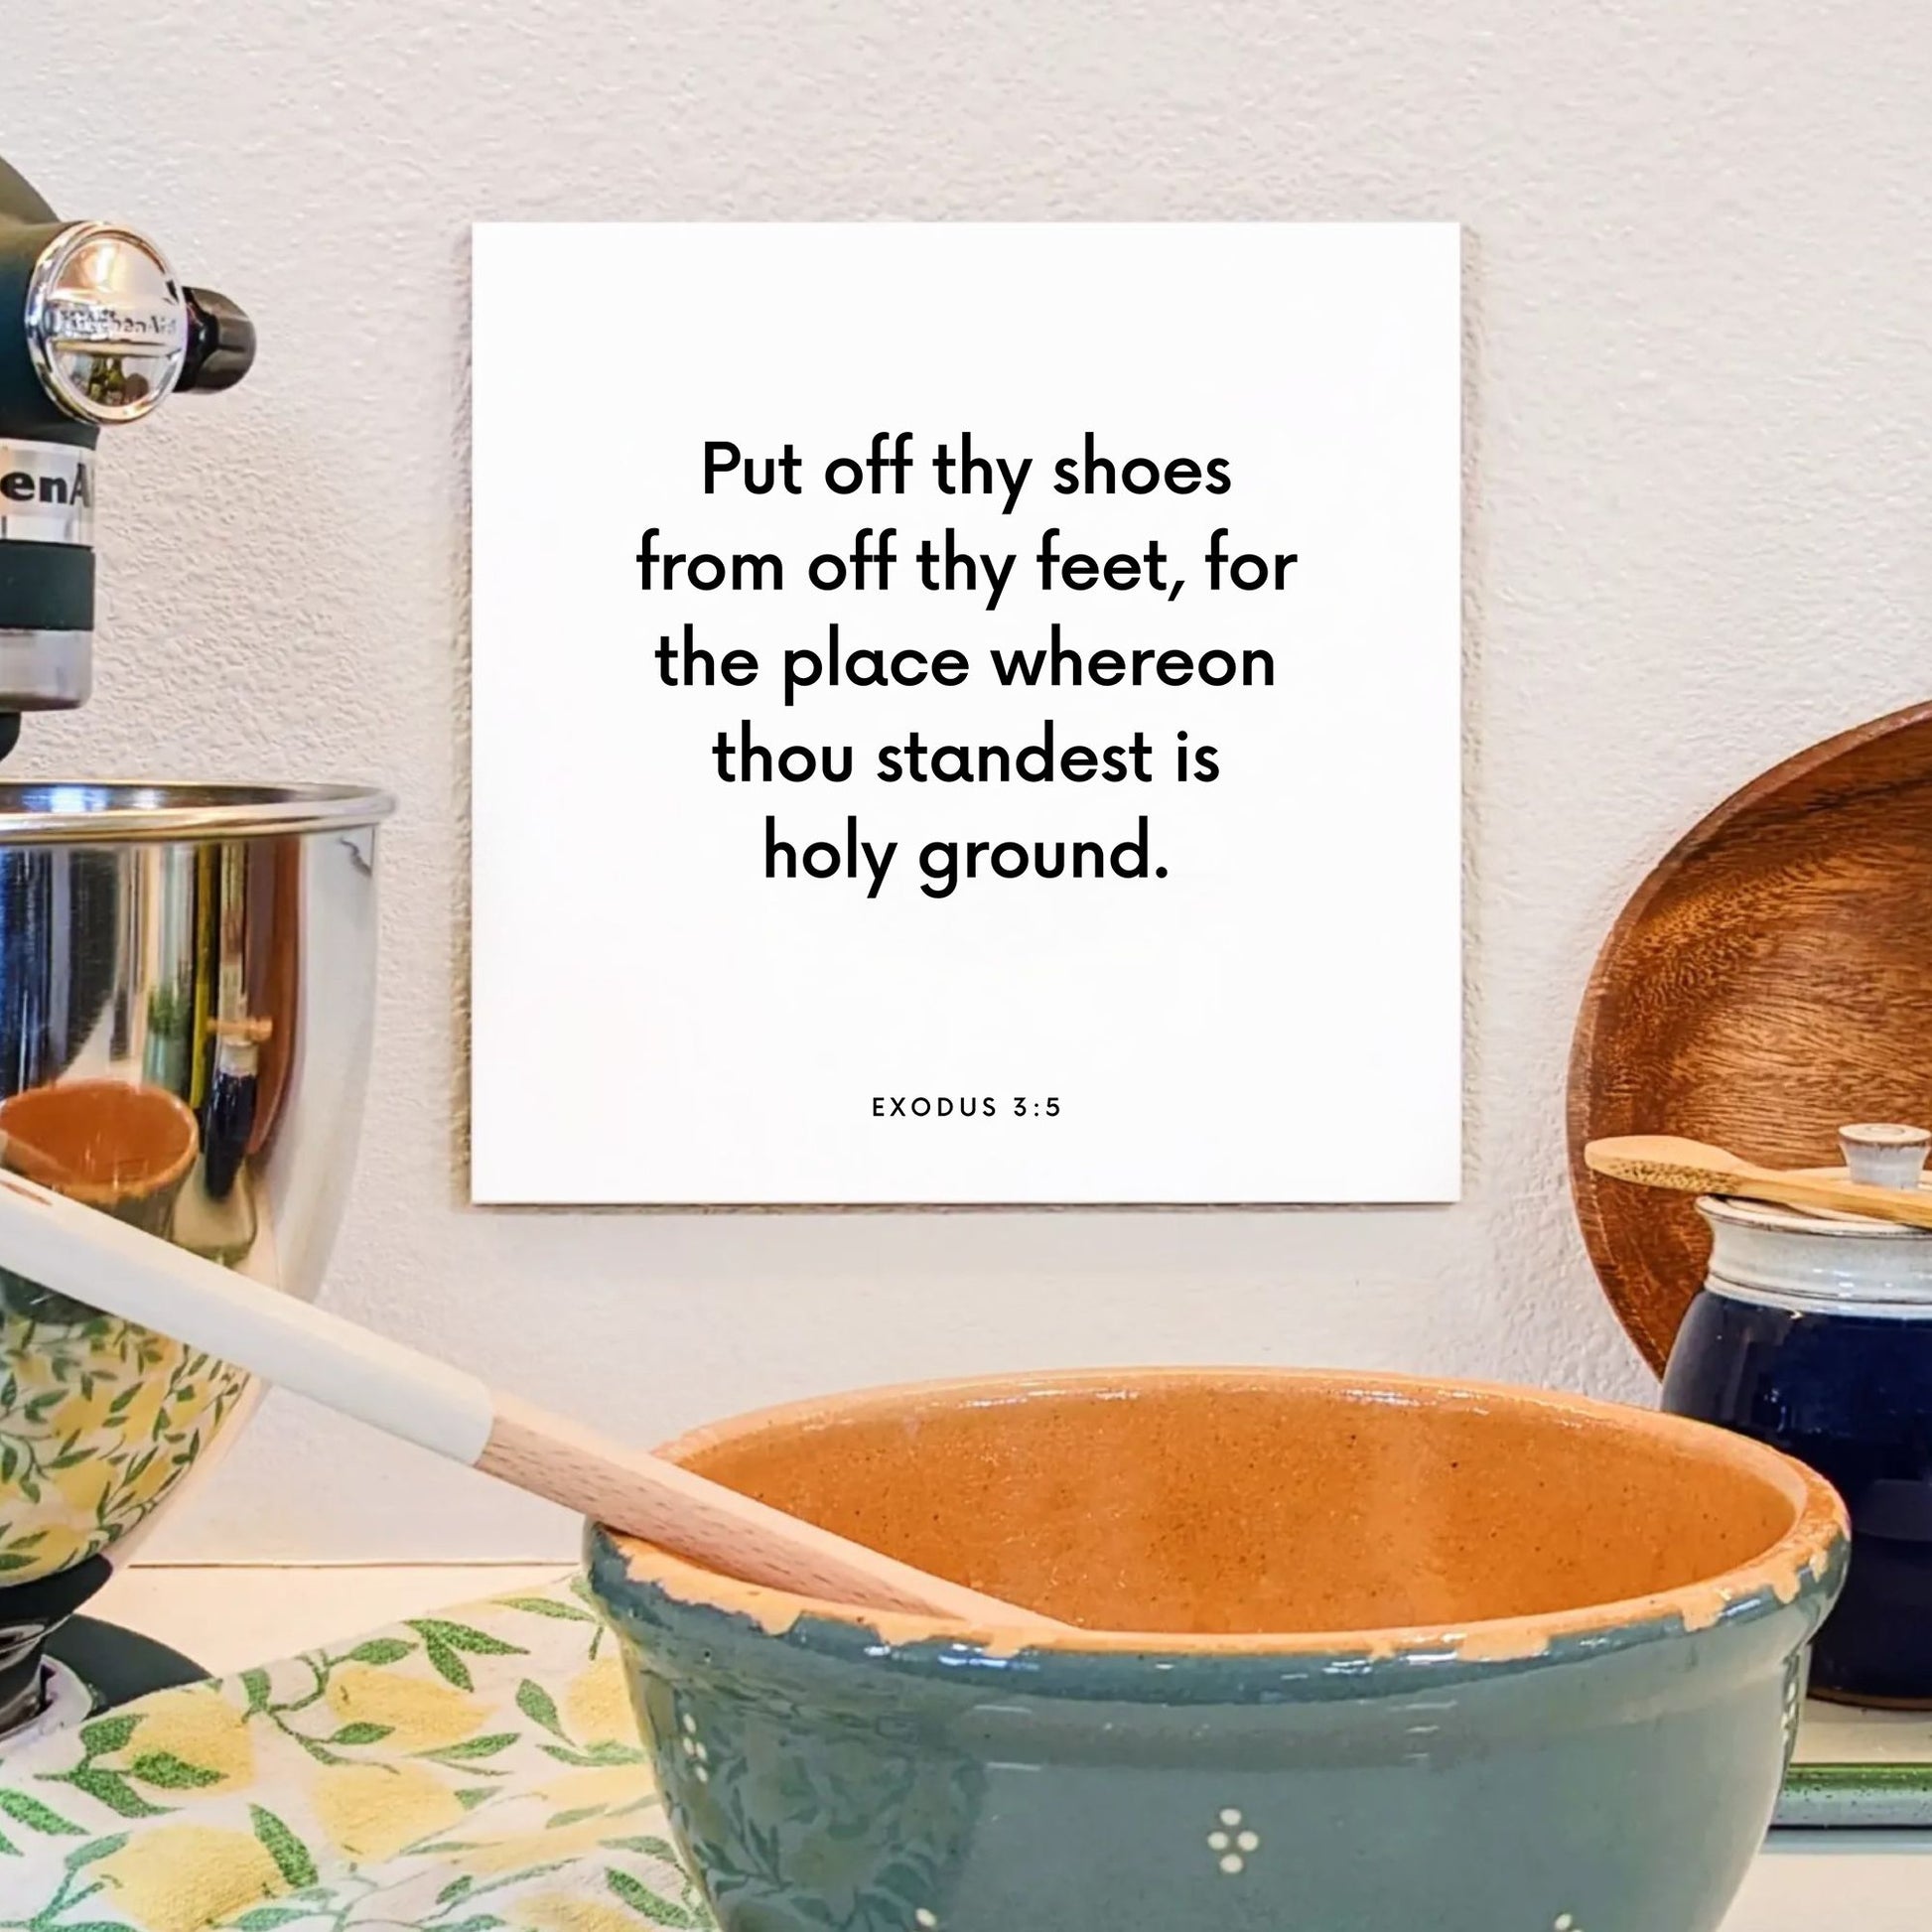 Kitchen mouting of the scripture tile for Exodus 3:5 - "Put off thy shoes from off thy feet"